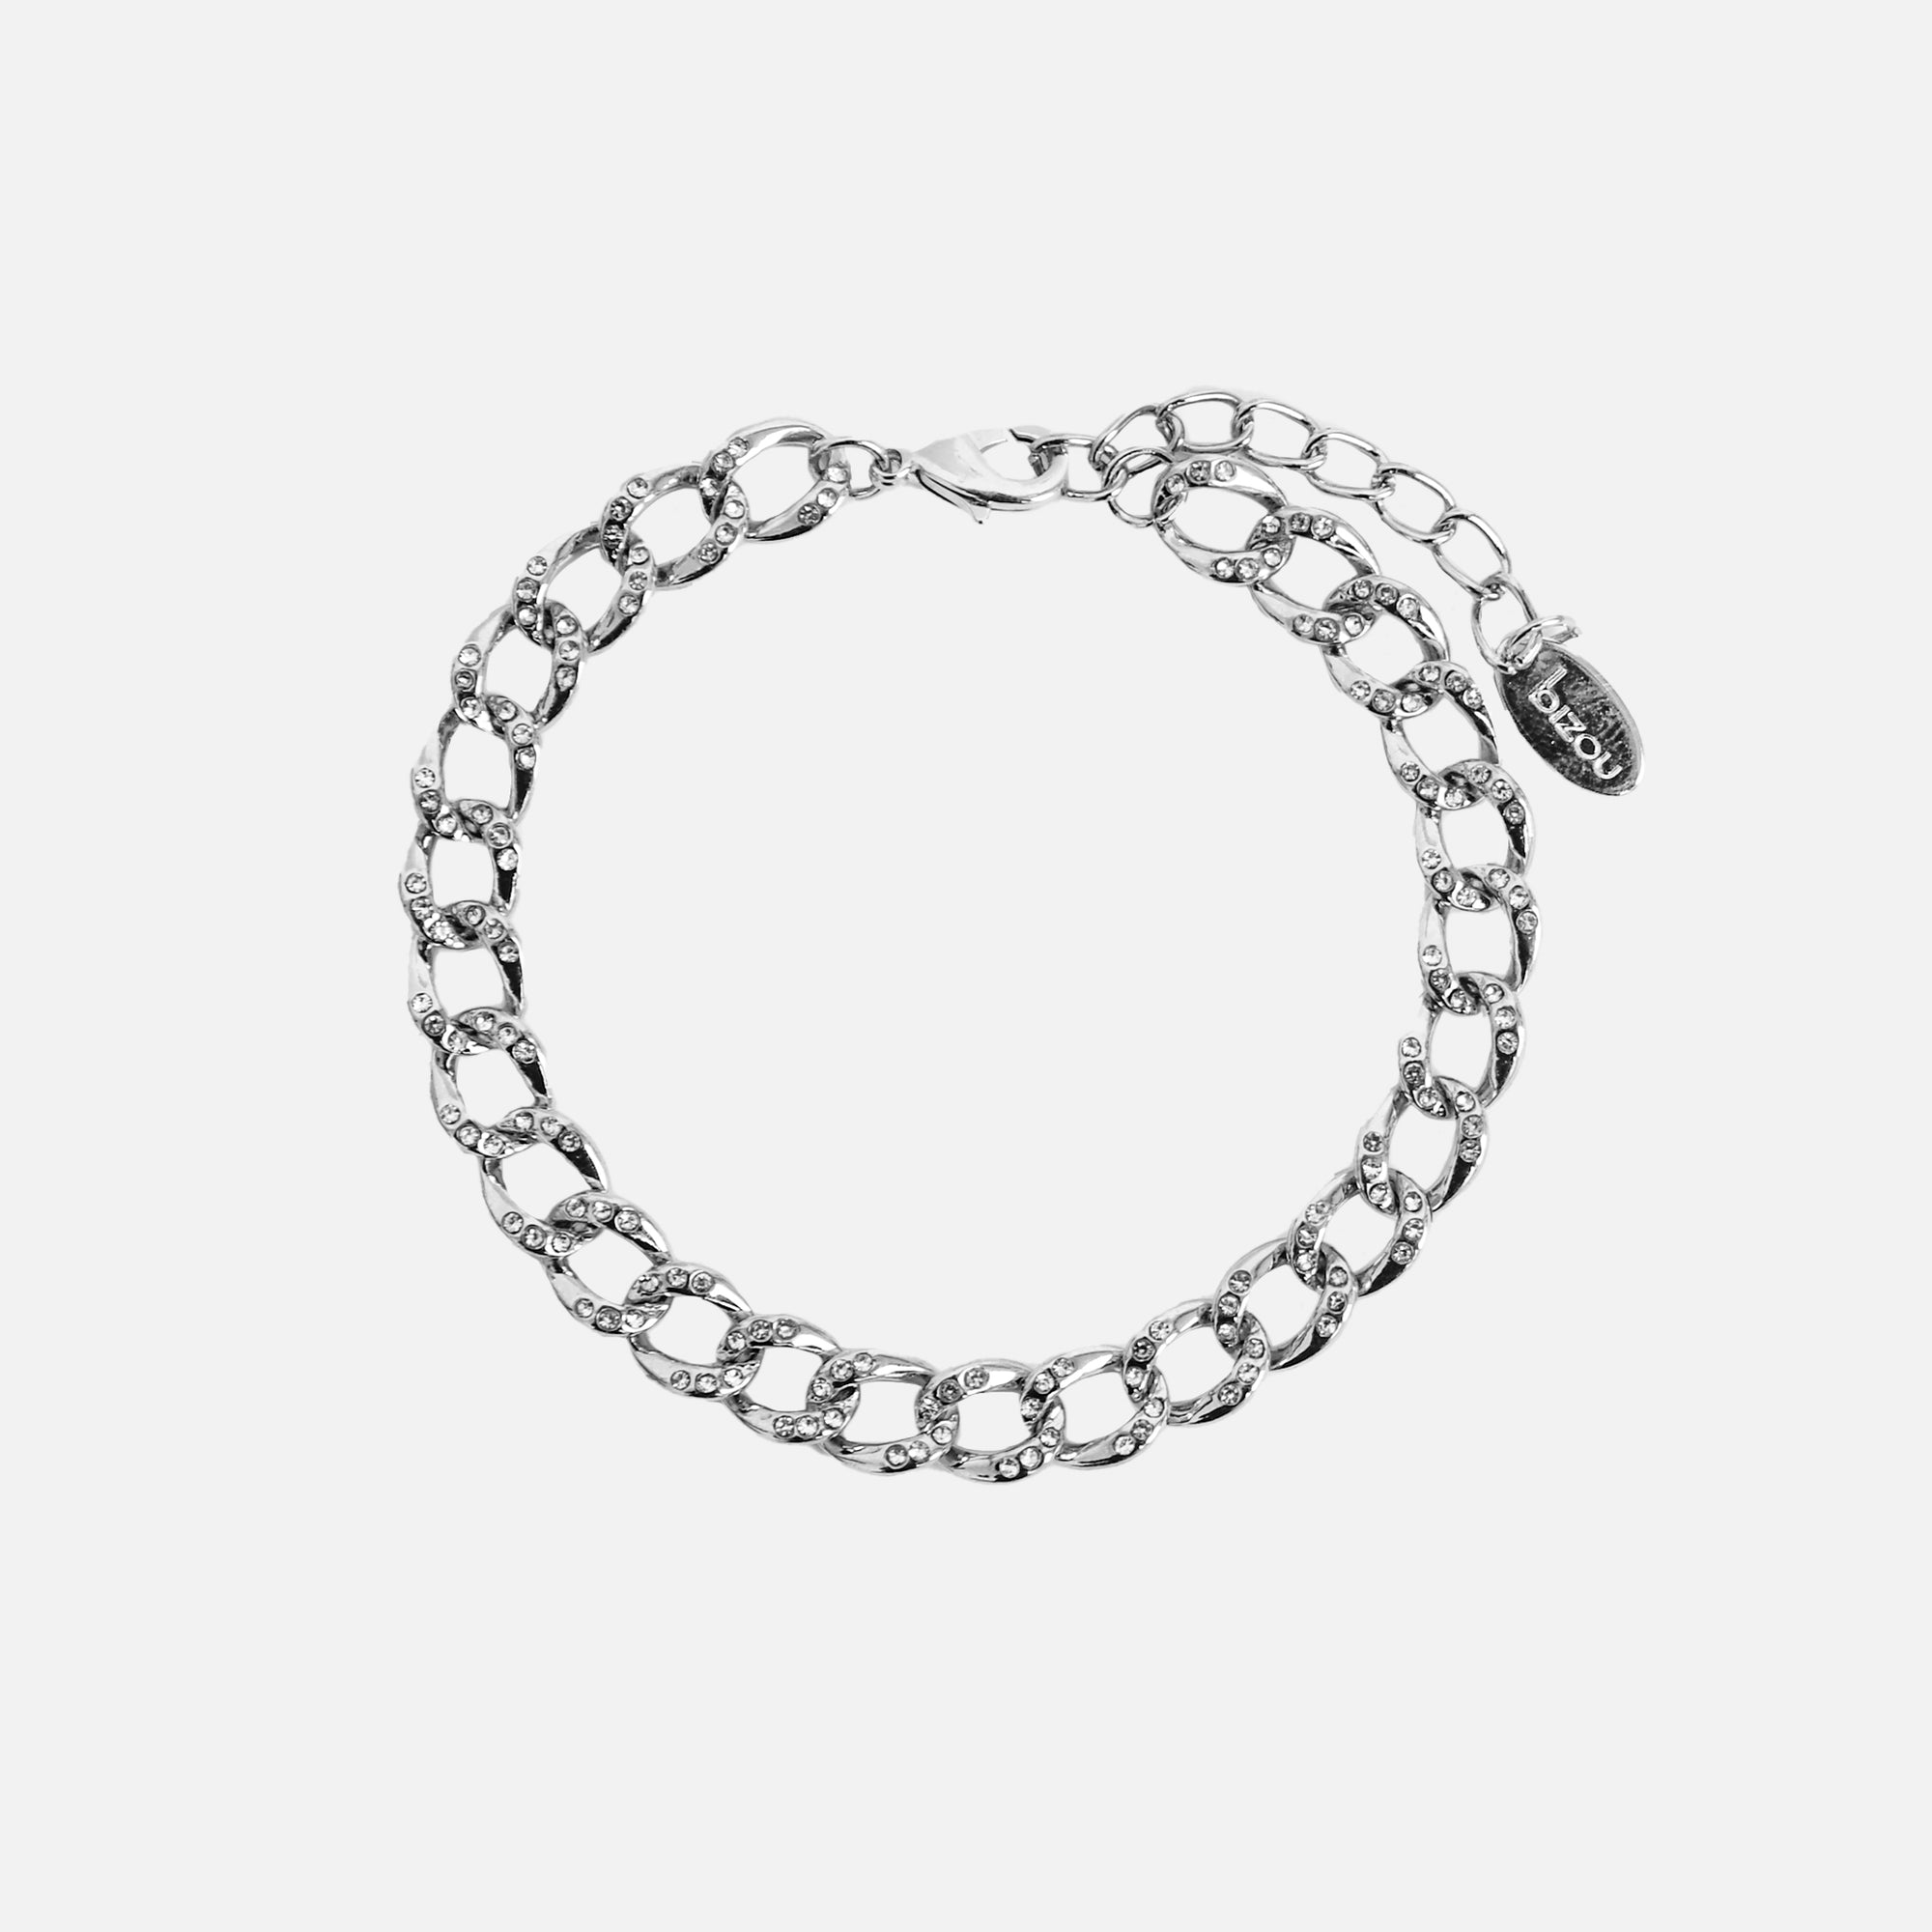 Silvered bracelet with small zircons